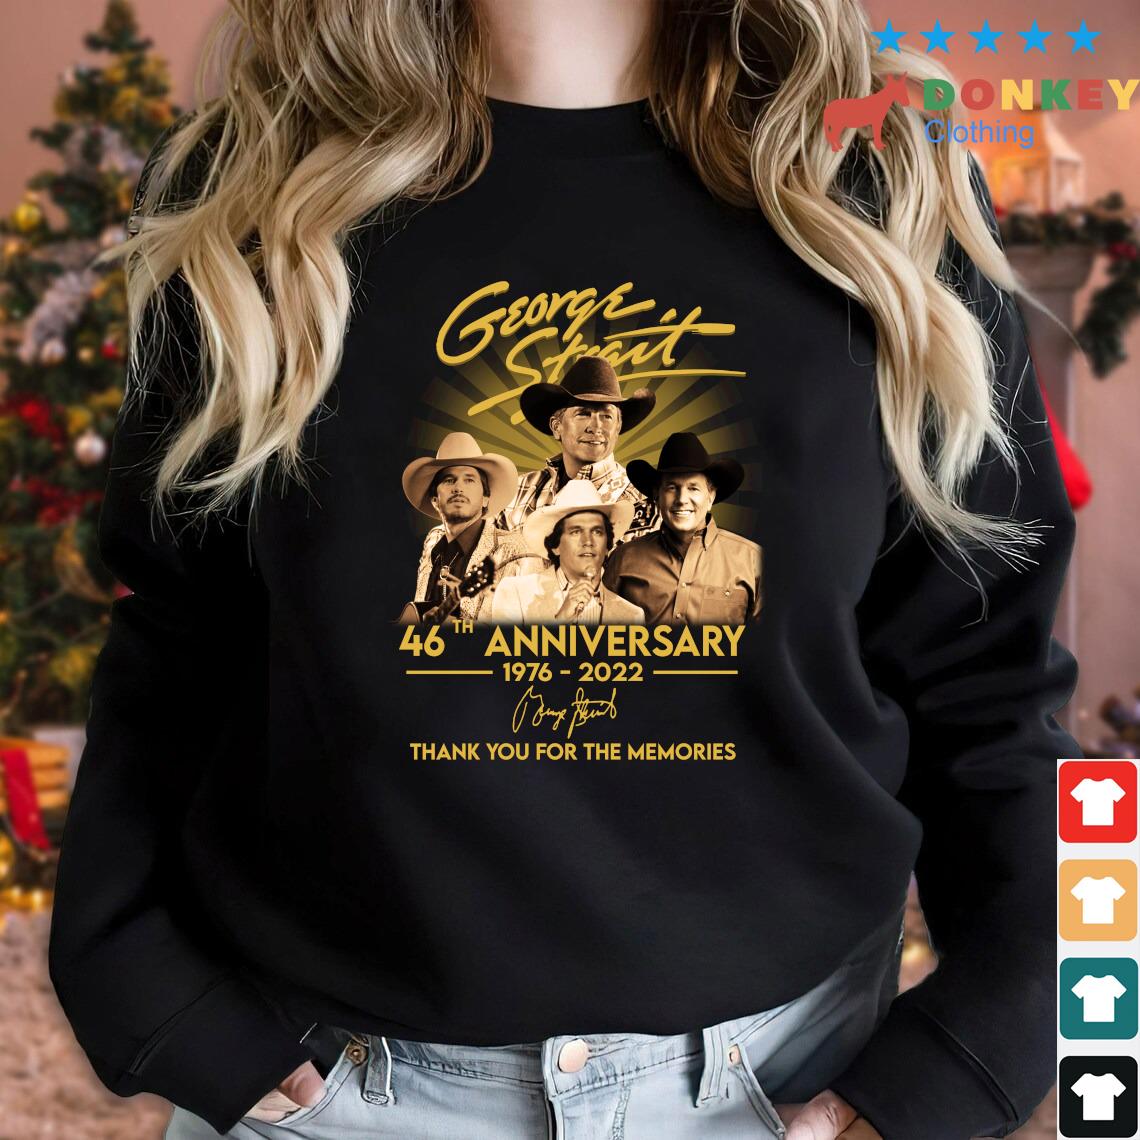 Hot George Strait 46th anniversary 1076-2022 thank you for the memories signature tee shirt